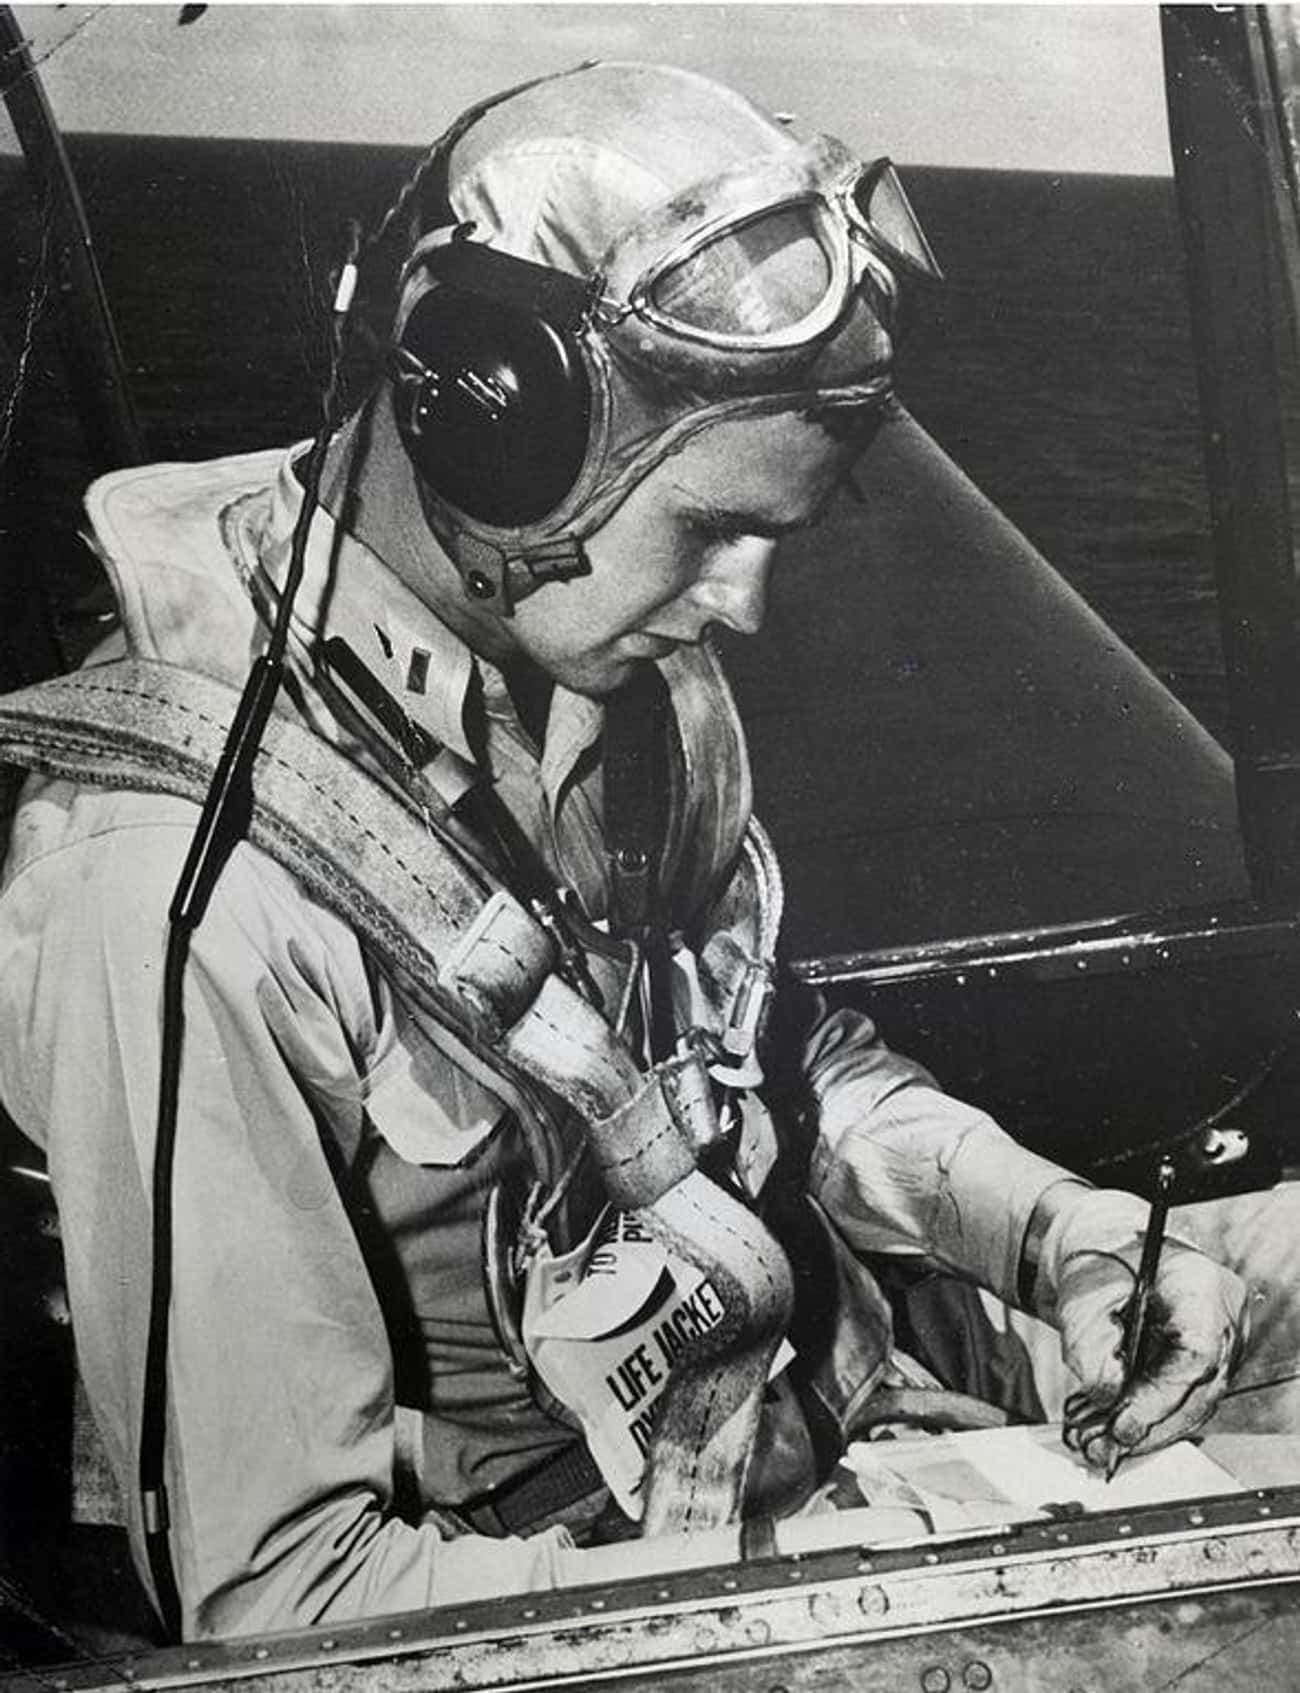 As A World War II Pilot, George H.W. Bush Completed A Bombing Run With His Engine On Fire